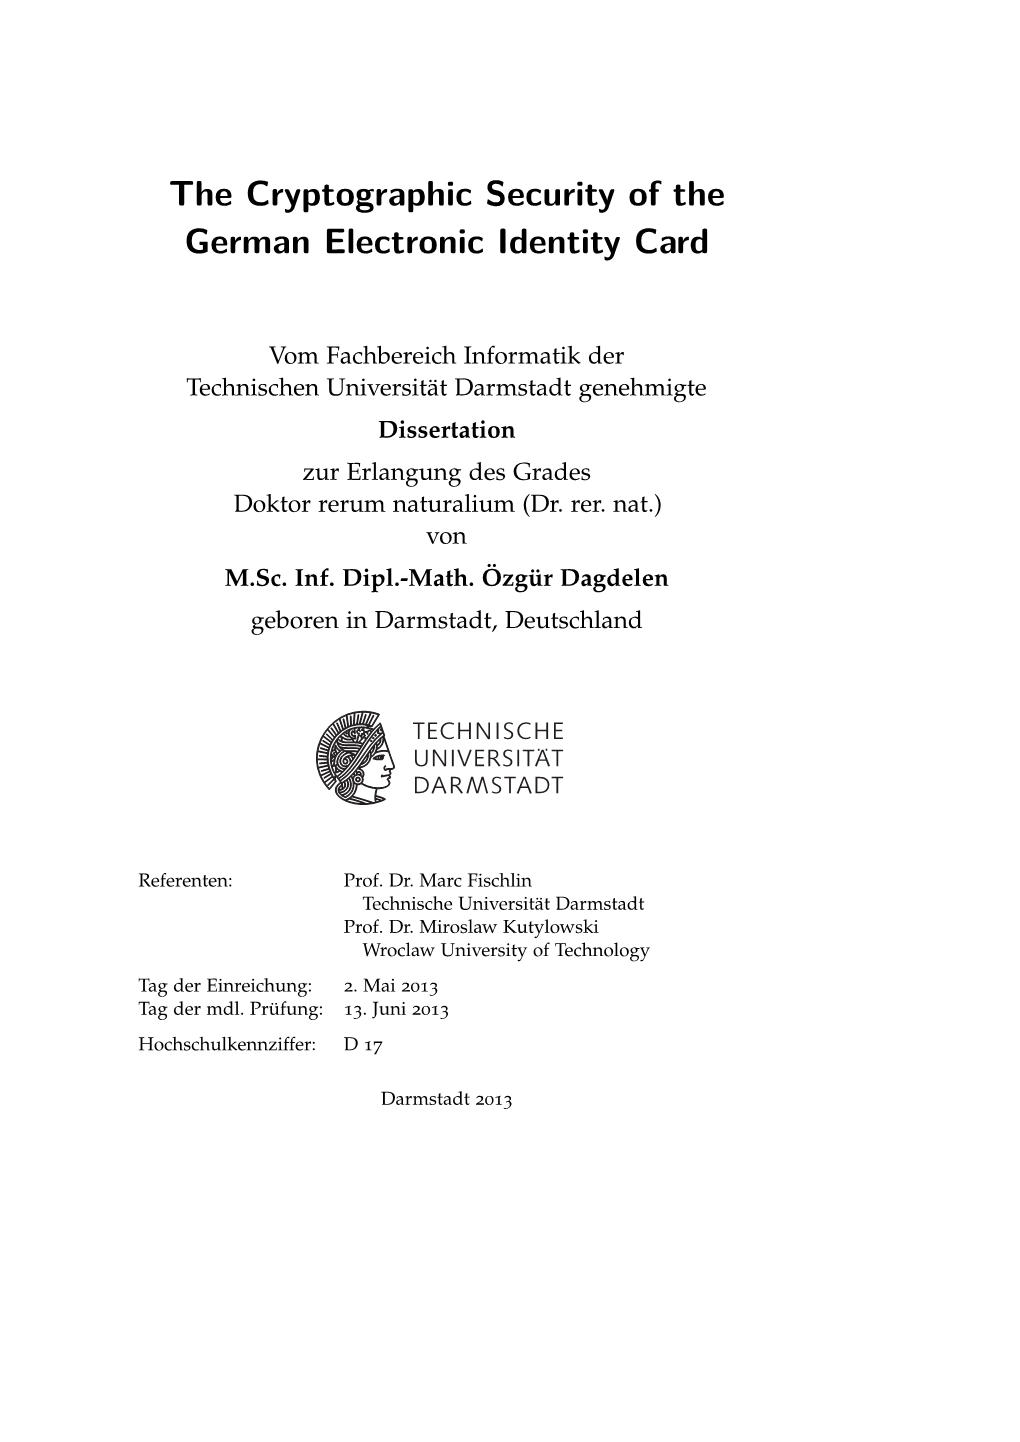 The Cryptographic Security of the German Electronic Identity Card